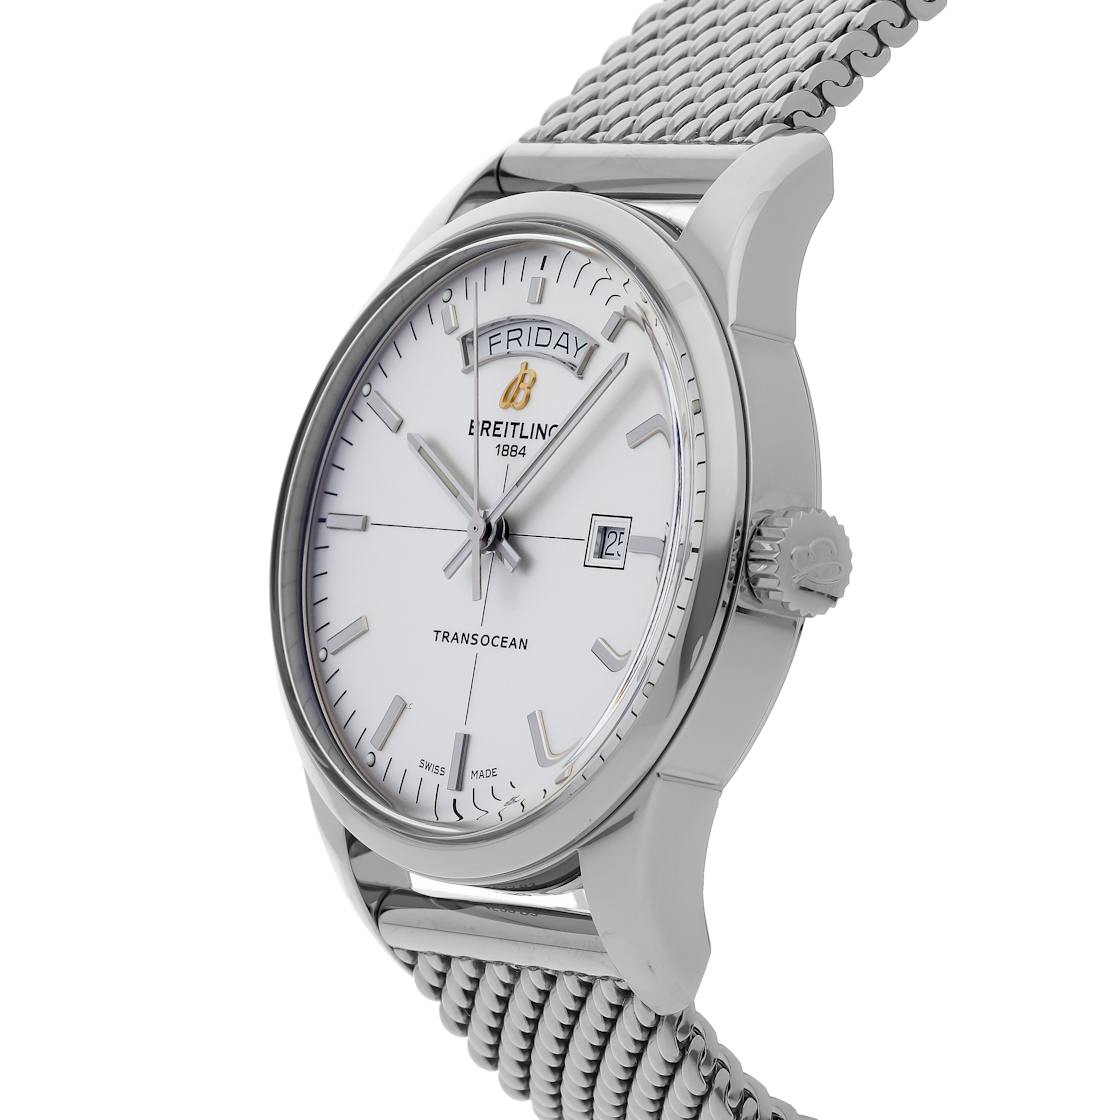 1 HOUR LEFT - To win this Breitling Transocean - £1.99 a ticket - Live draw  Tomorrow 10AM 